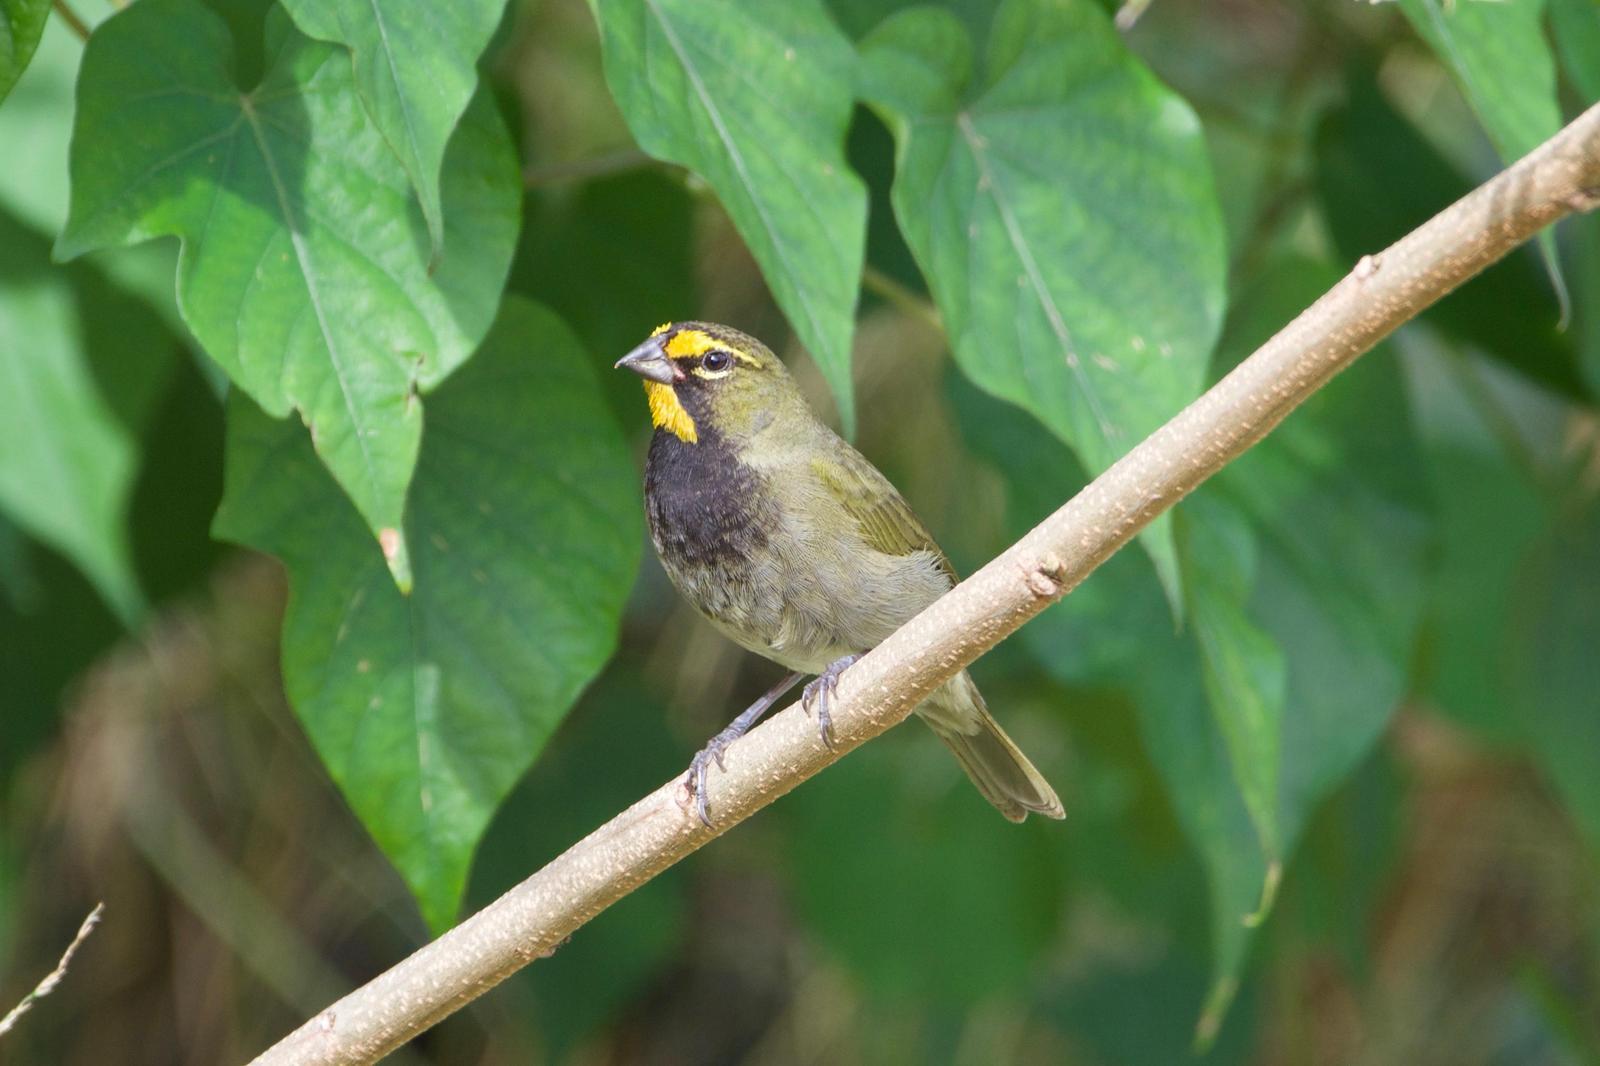 Yellow-faced Grassquit Photo by Ian Jarvie